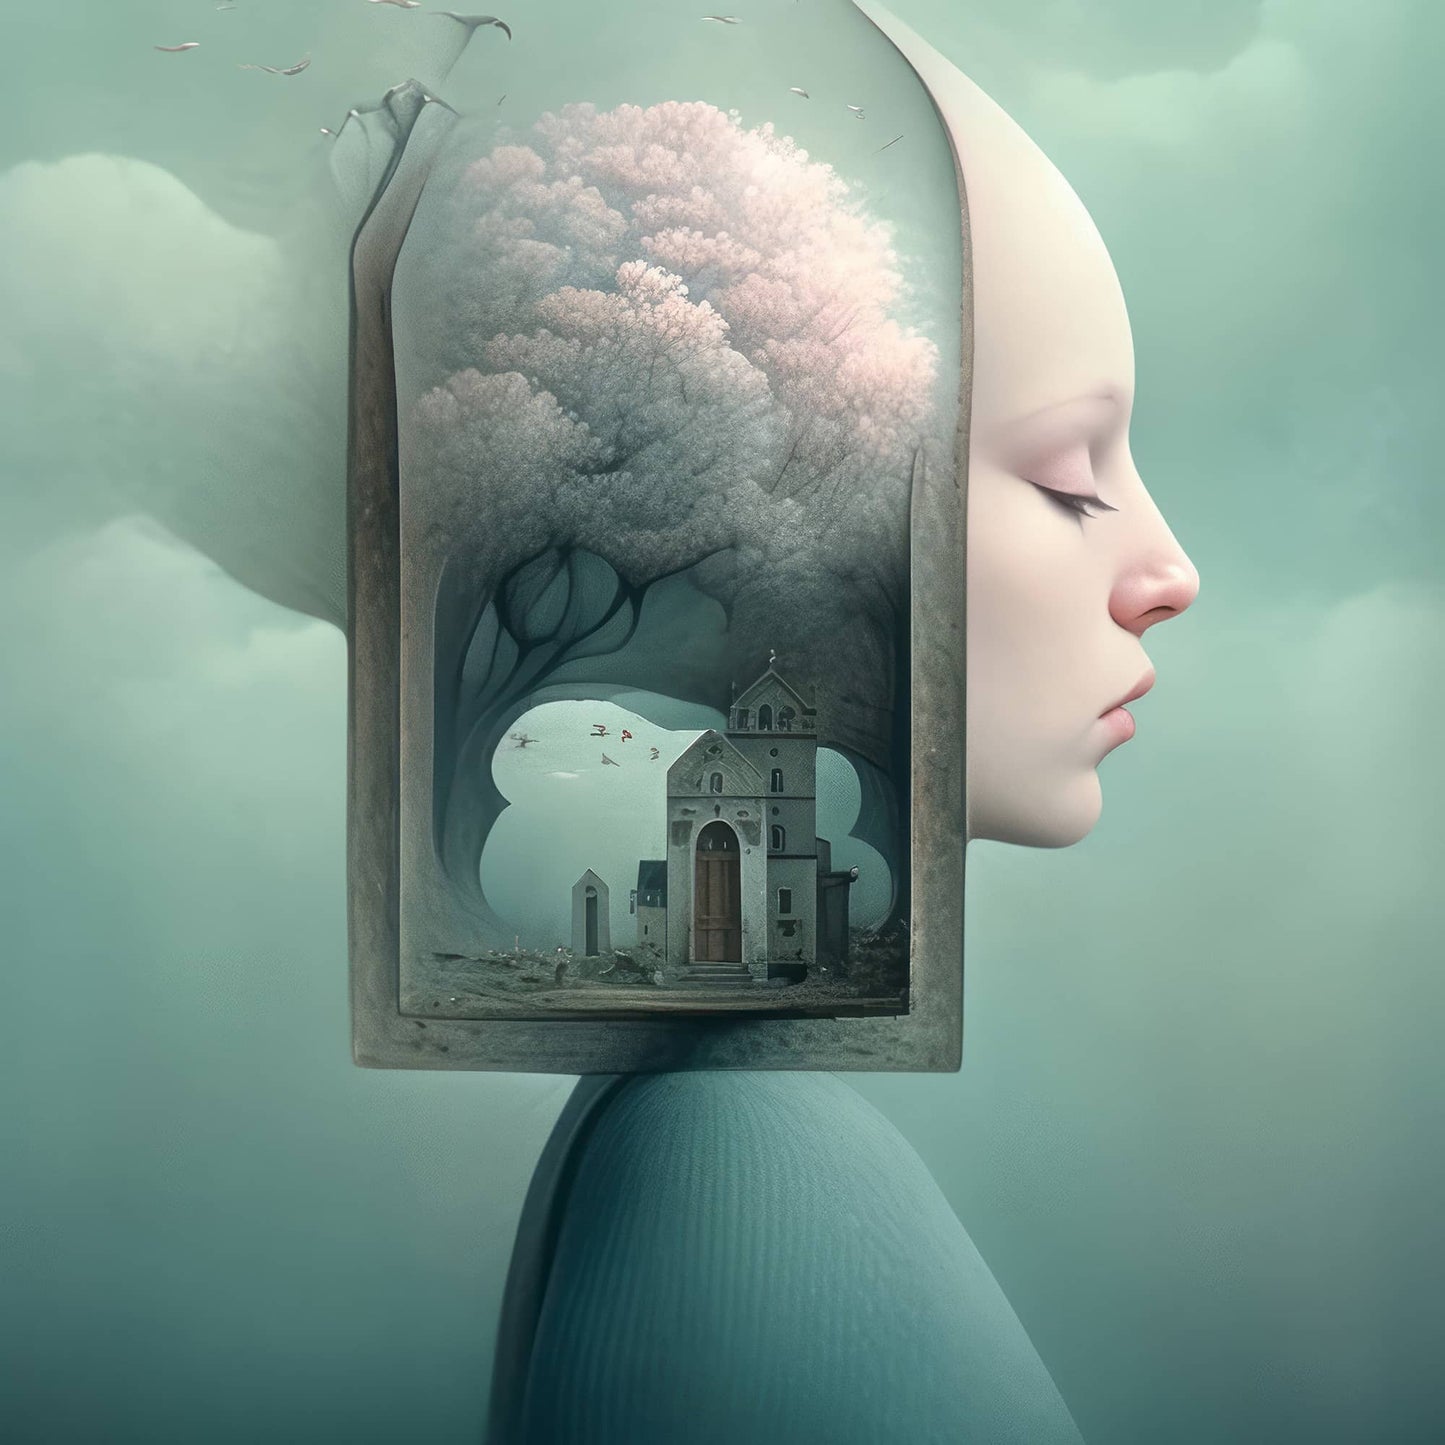 wall art room decor by Instagram surreal AI artist